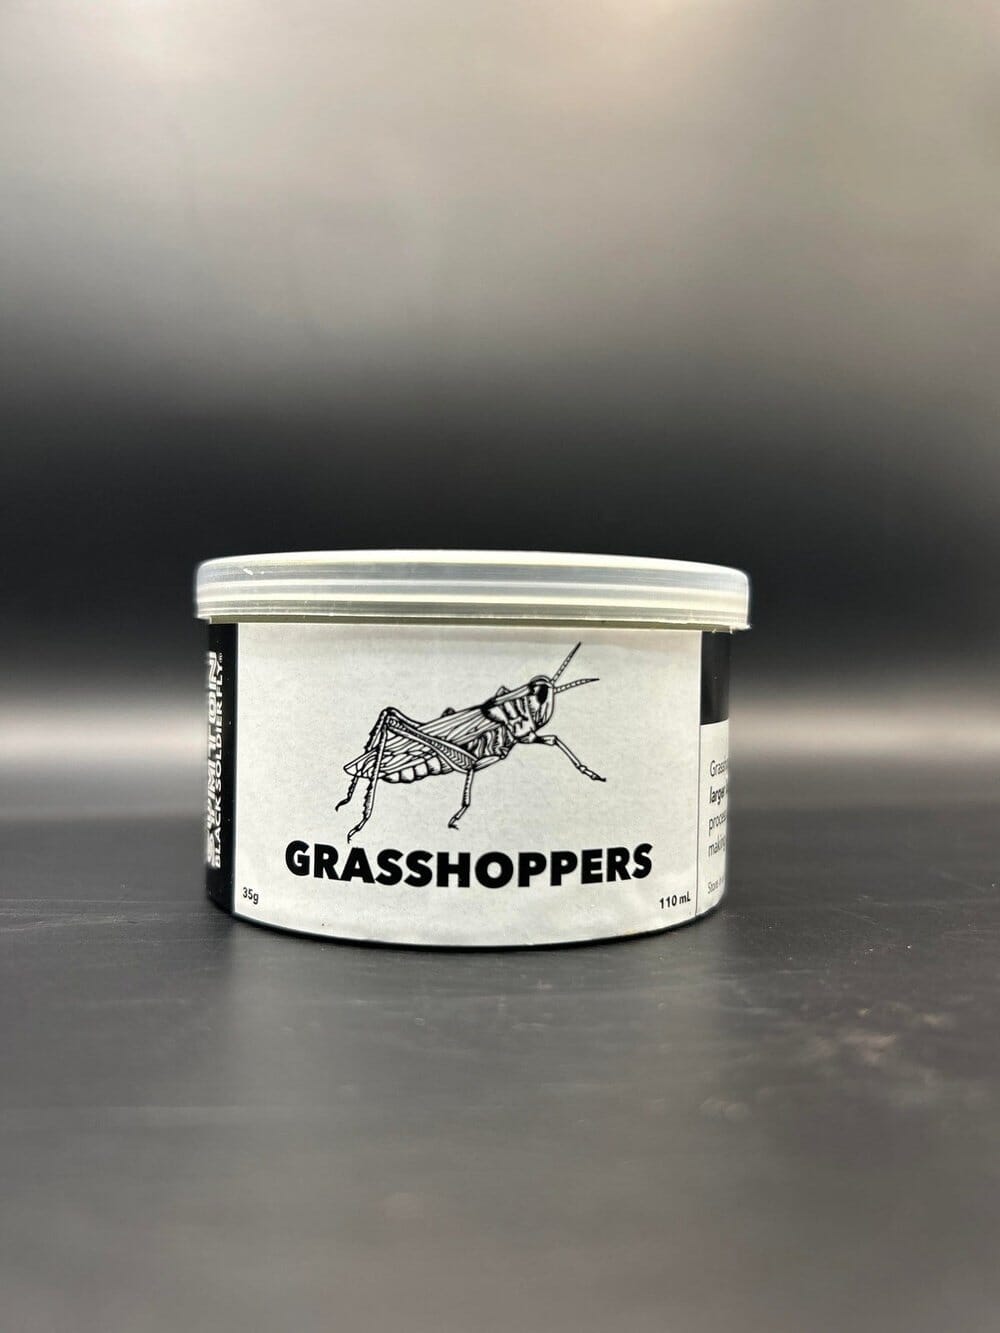 Canned Grasshoppers